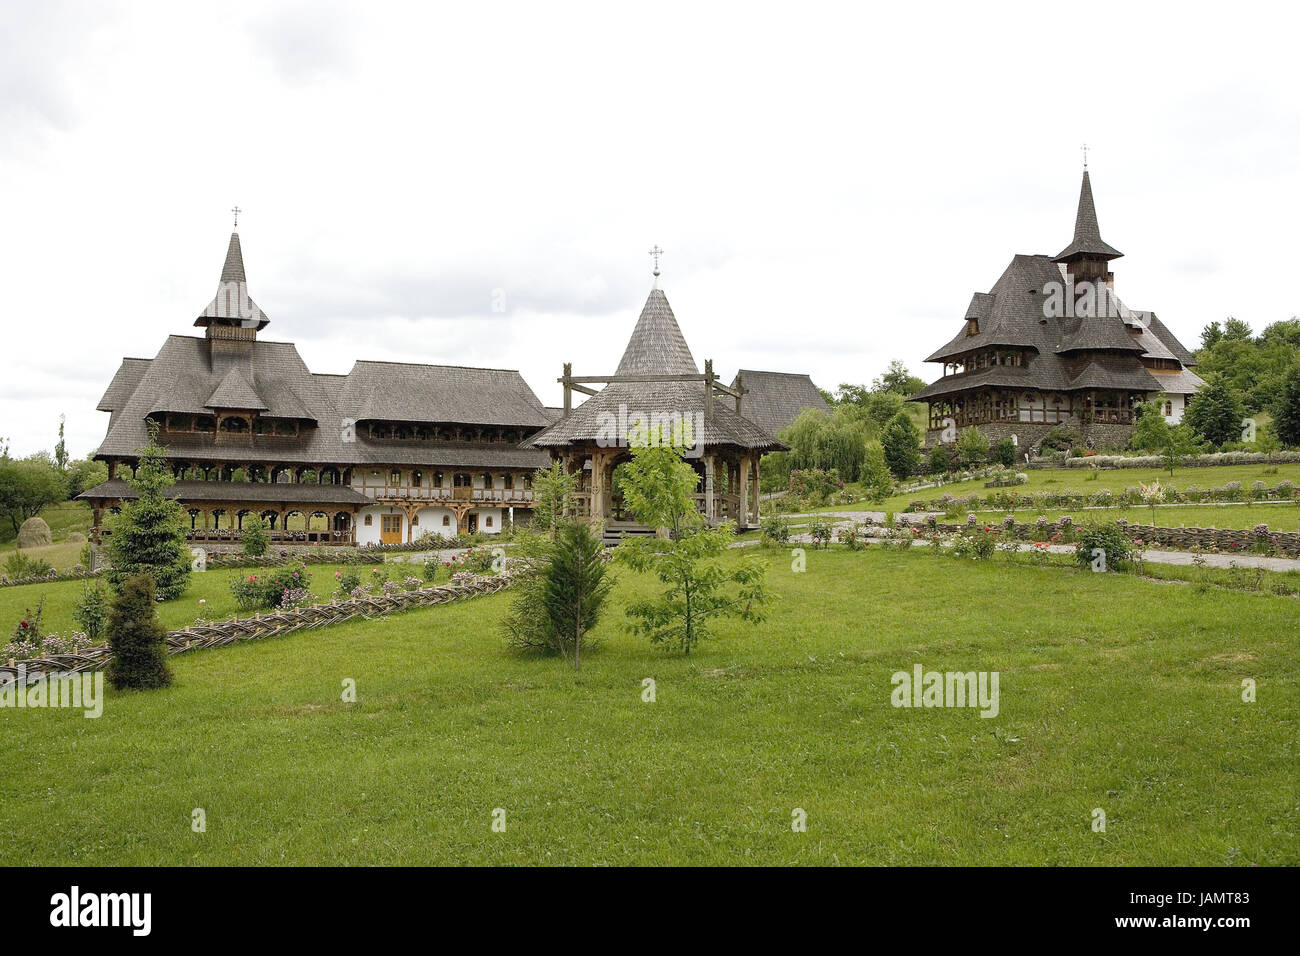 Romania,region of Maramures,Barsana,cloister attachment,destination,place of interest,cloister,faith,religion,Christianity,orthodox,architecture,building,houses,timber-frame construction way,meadow,outside,deserted,churches,churches,sacred setting, Stock Photo